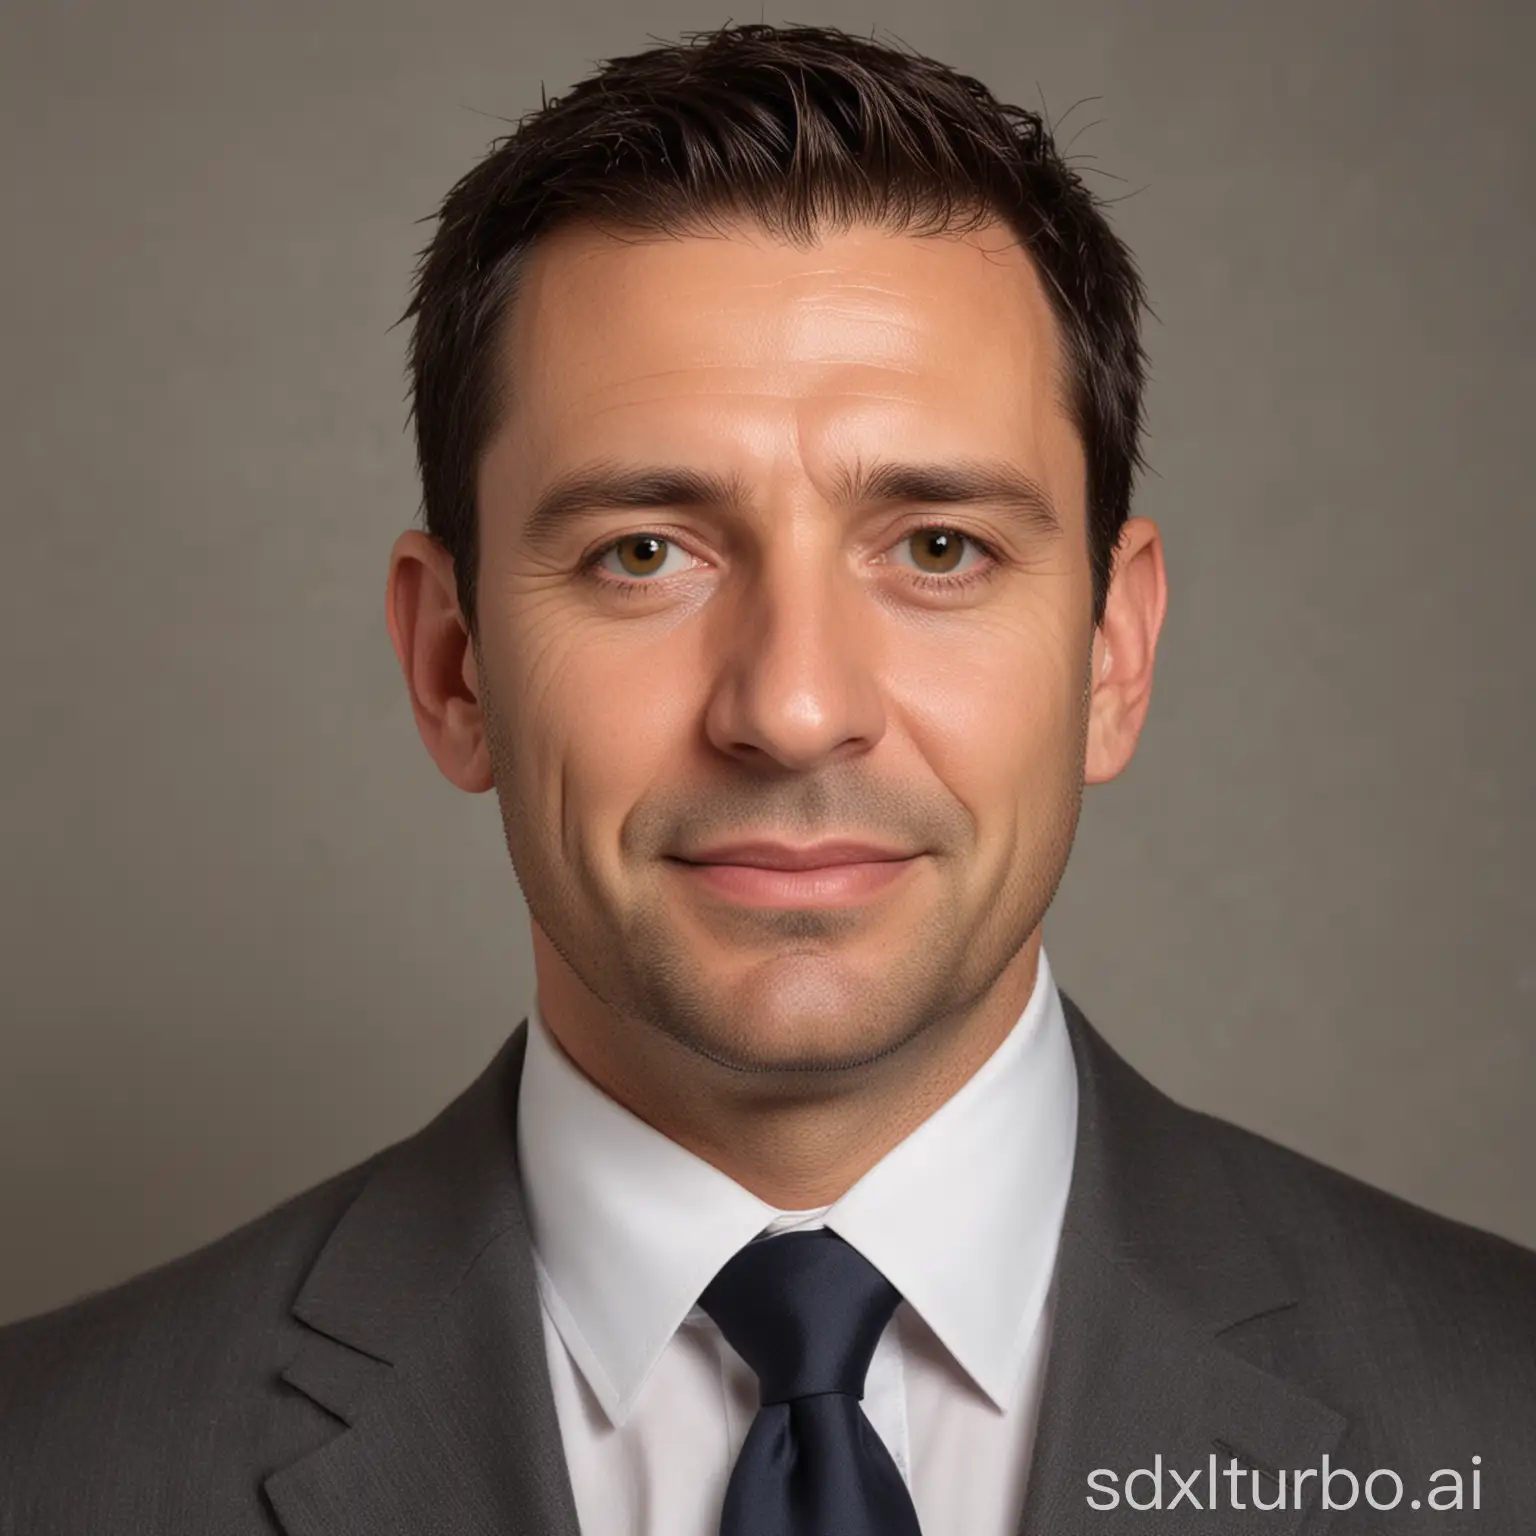 Professional-Business-Portrait-Confident-40YearOld-Man-in-Suit-for-CV